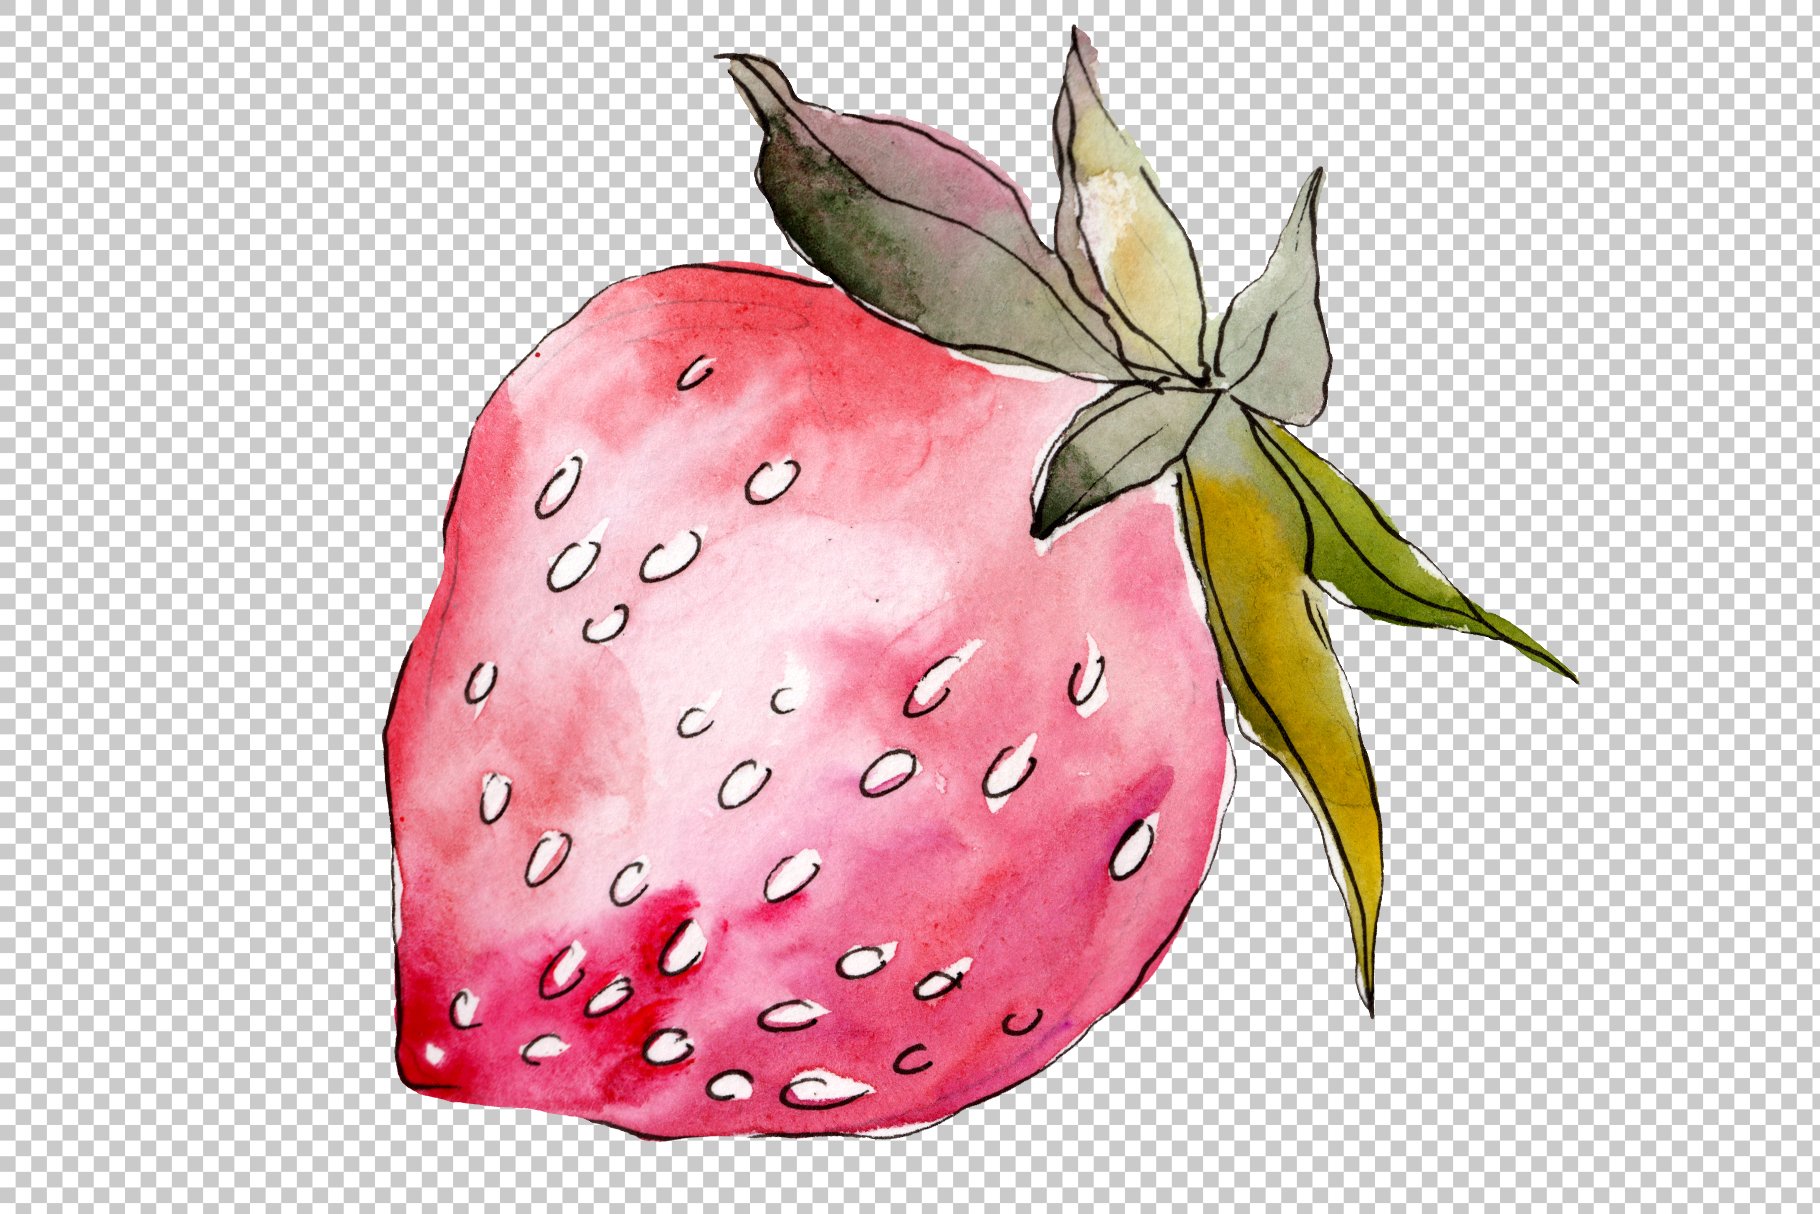 Watercolor strawberry on a transparent background.